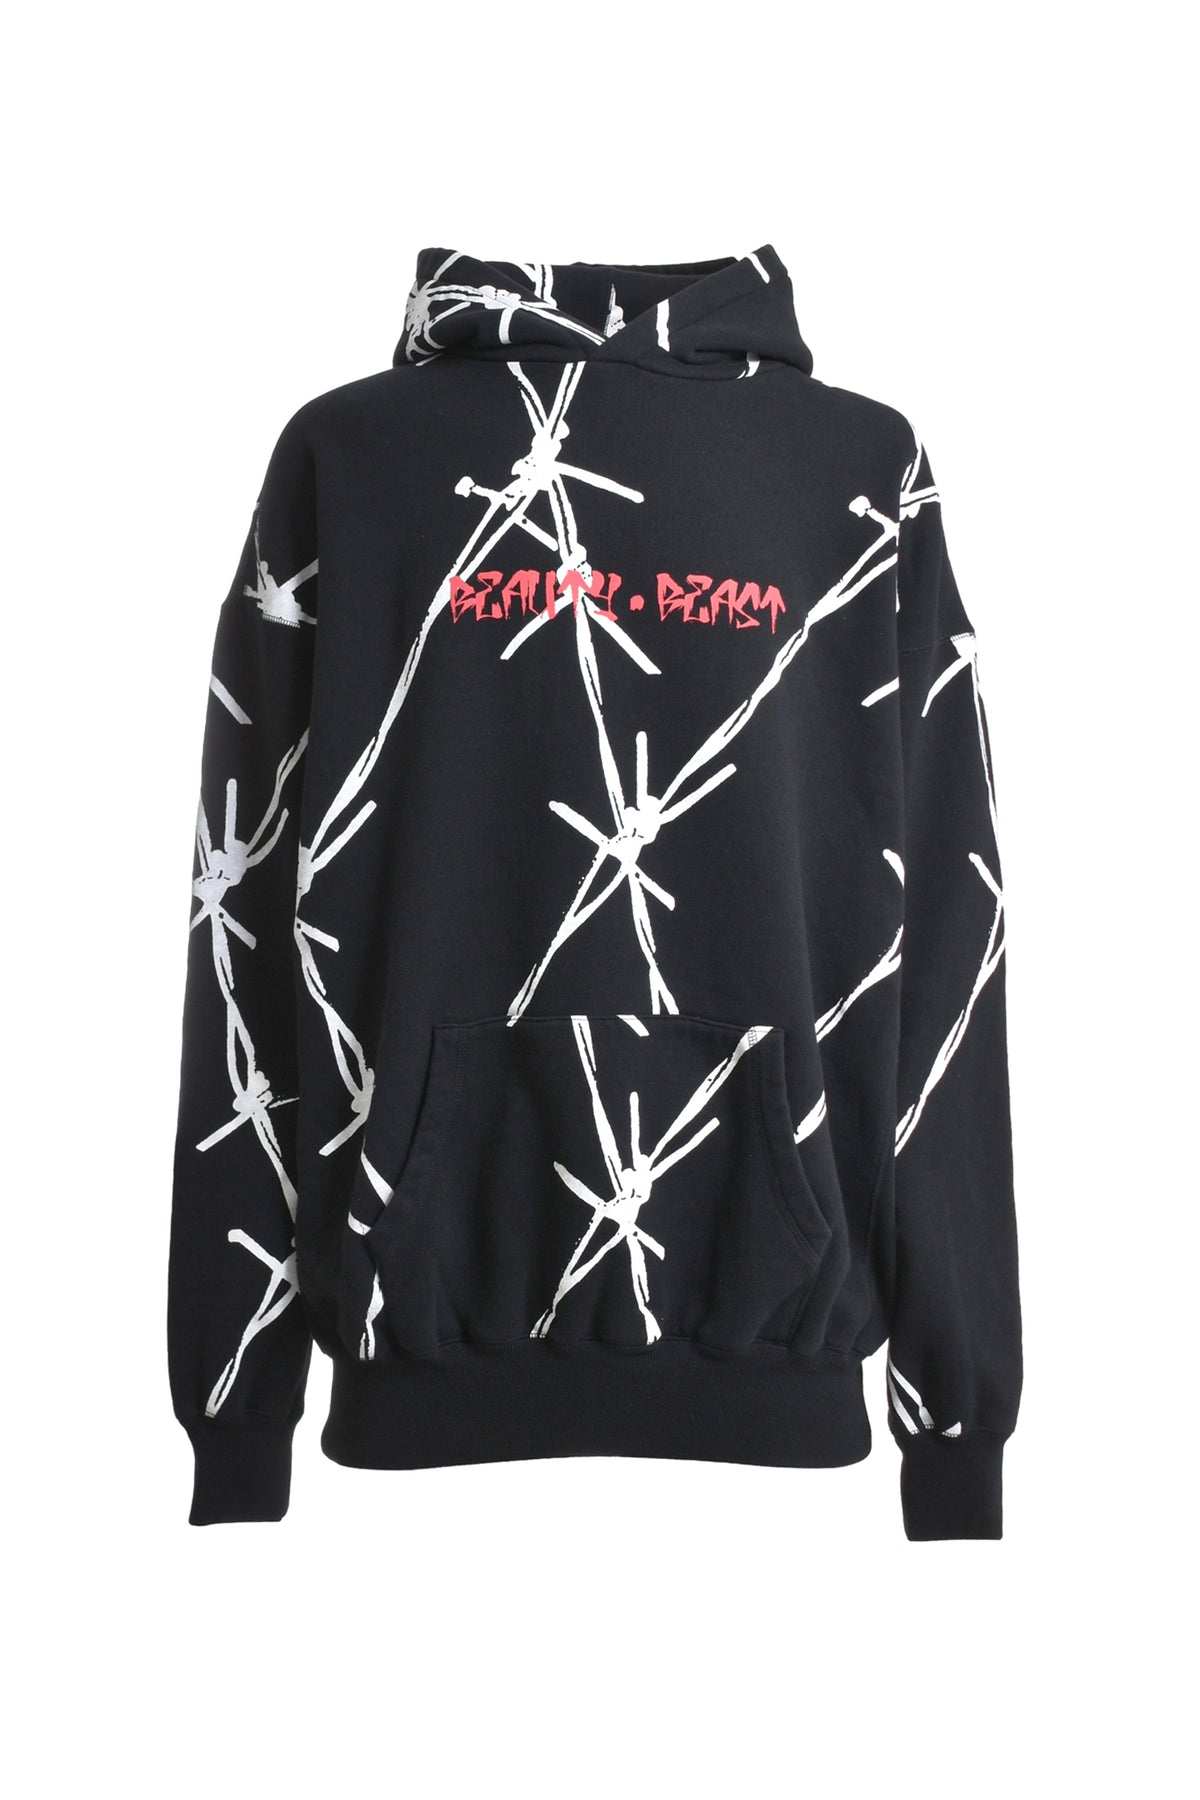 P.O HOODED “BARBED WIRE” / BLK